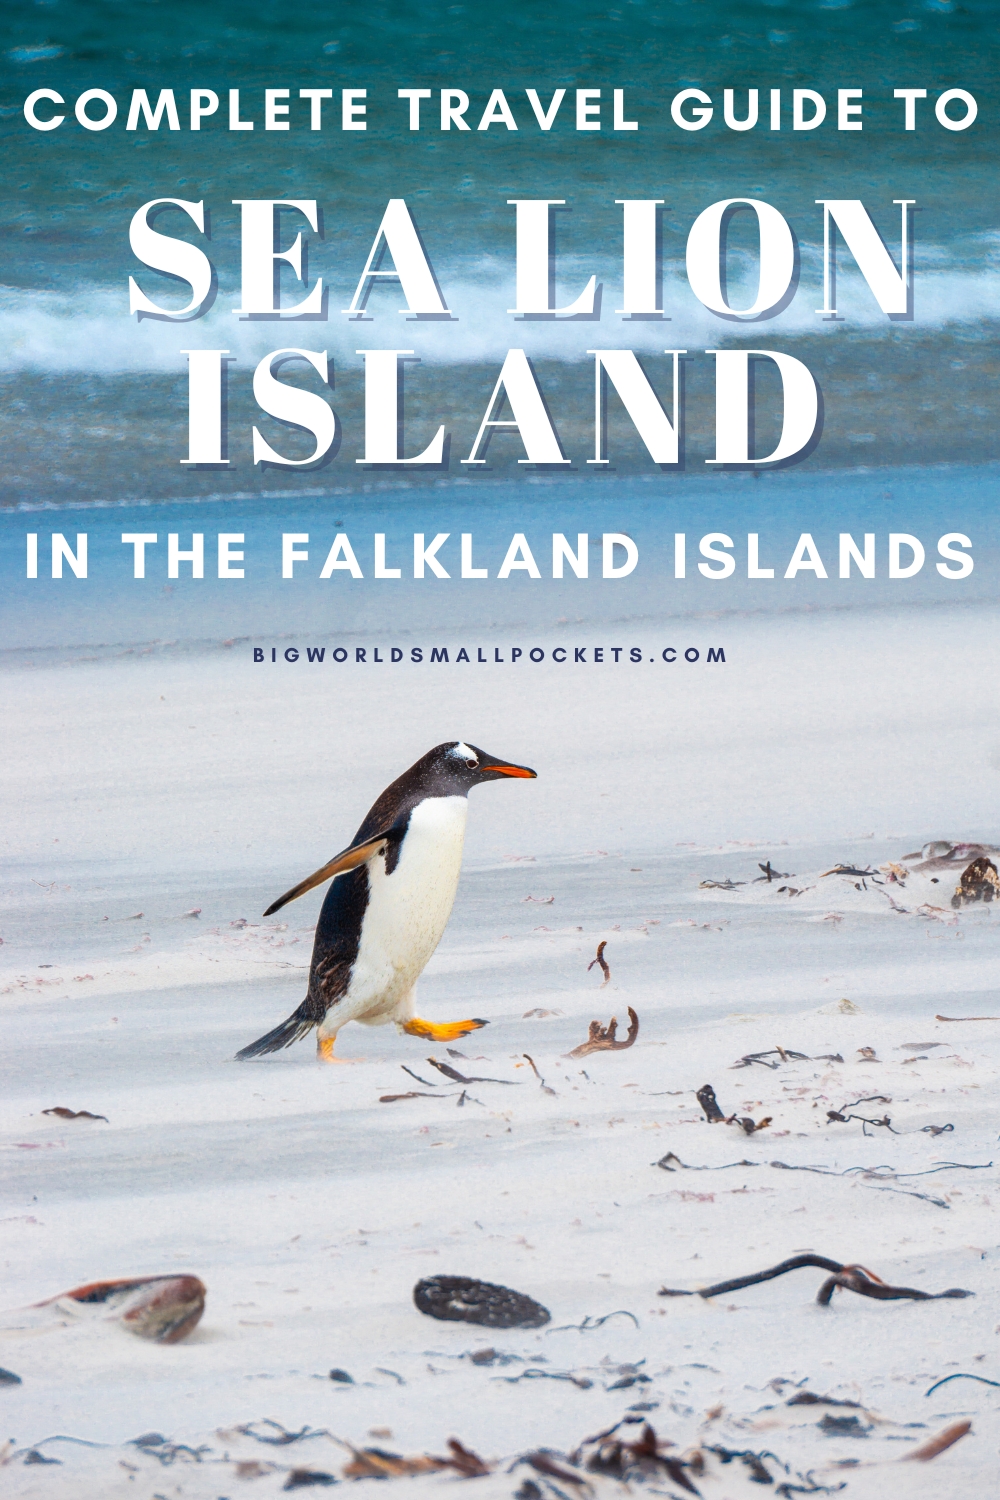 Complete Travel Guide to Sea Lion Island in the Falklands